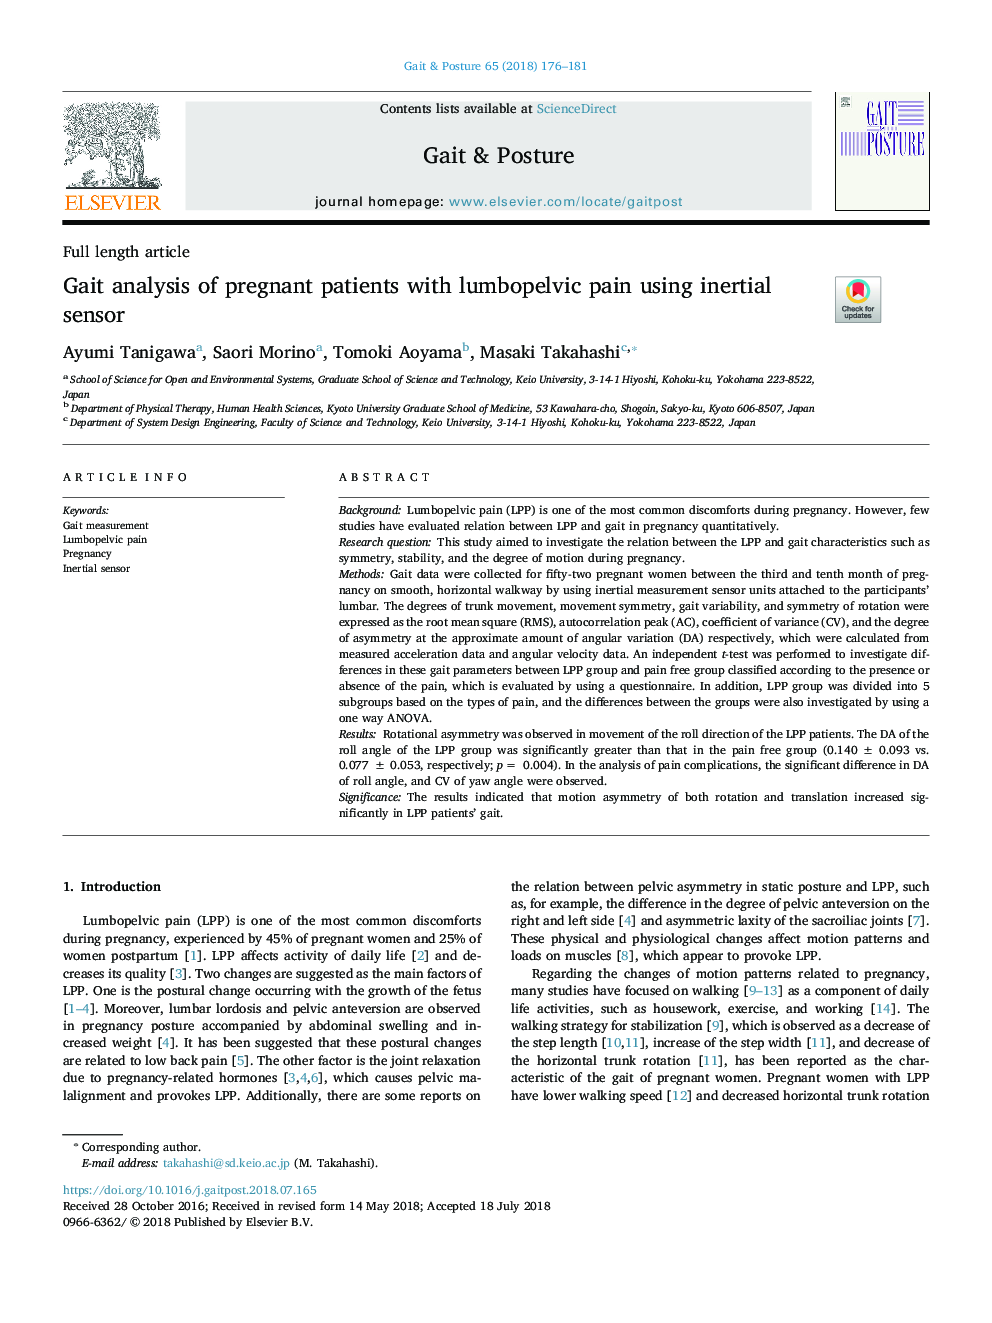 Gait analysis of pregnant patients with lumbopelvic pain using inertial sensor